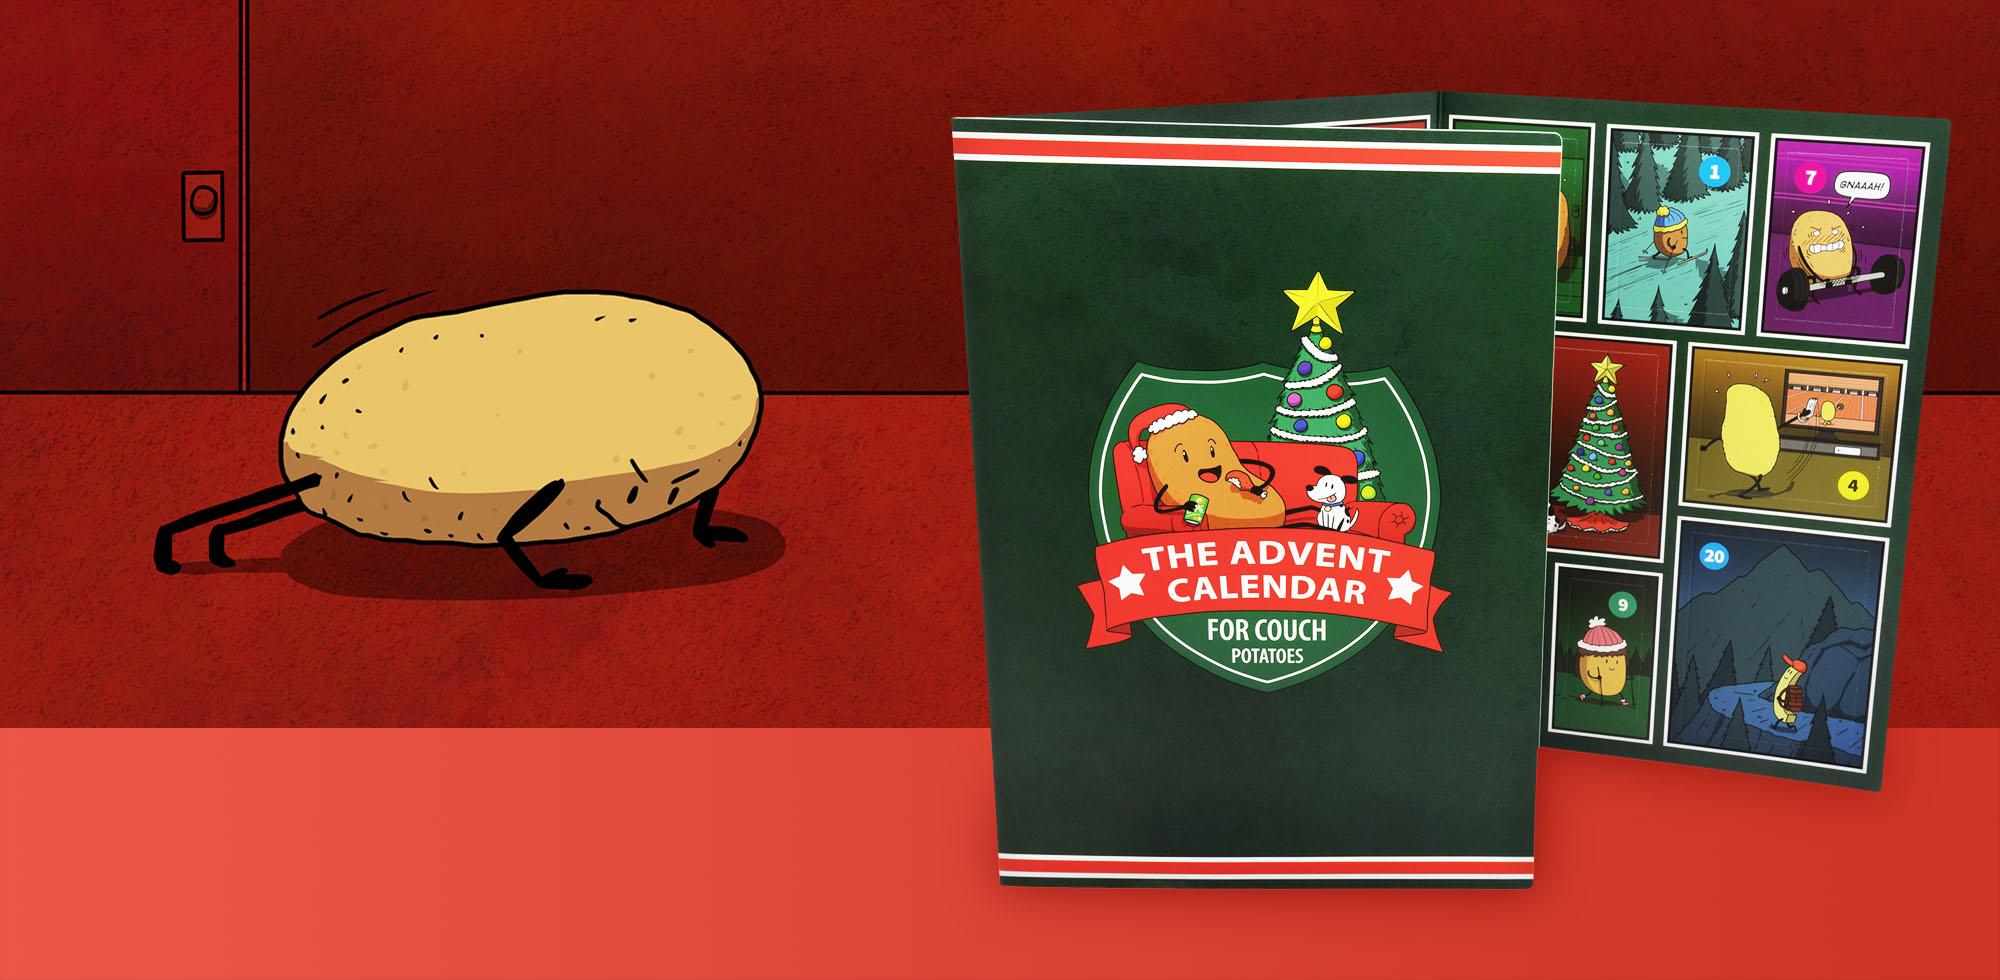 The Advent Calendar for Couch Potatoes